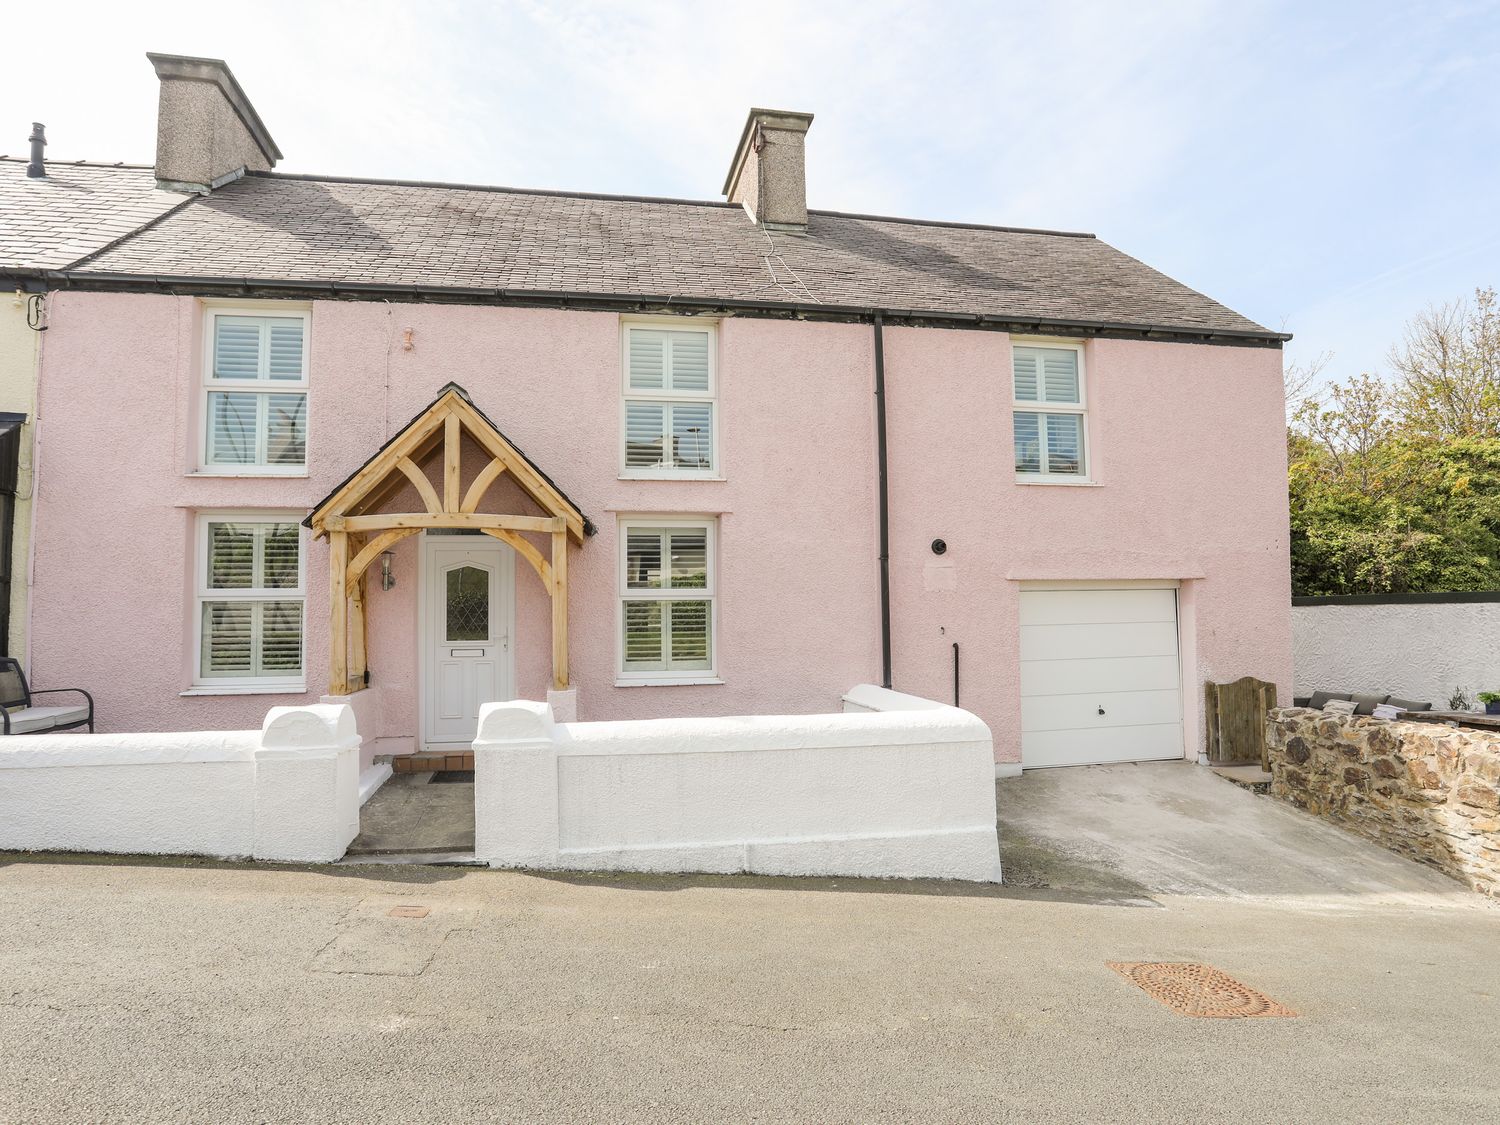 13 Quay Street - Anglesey - 1094568 - photo 1